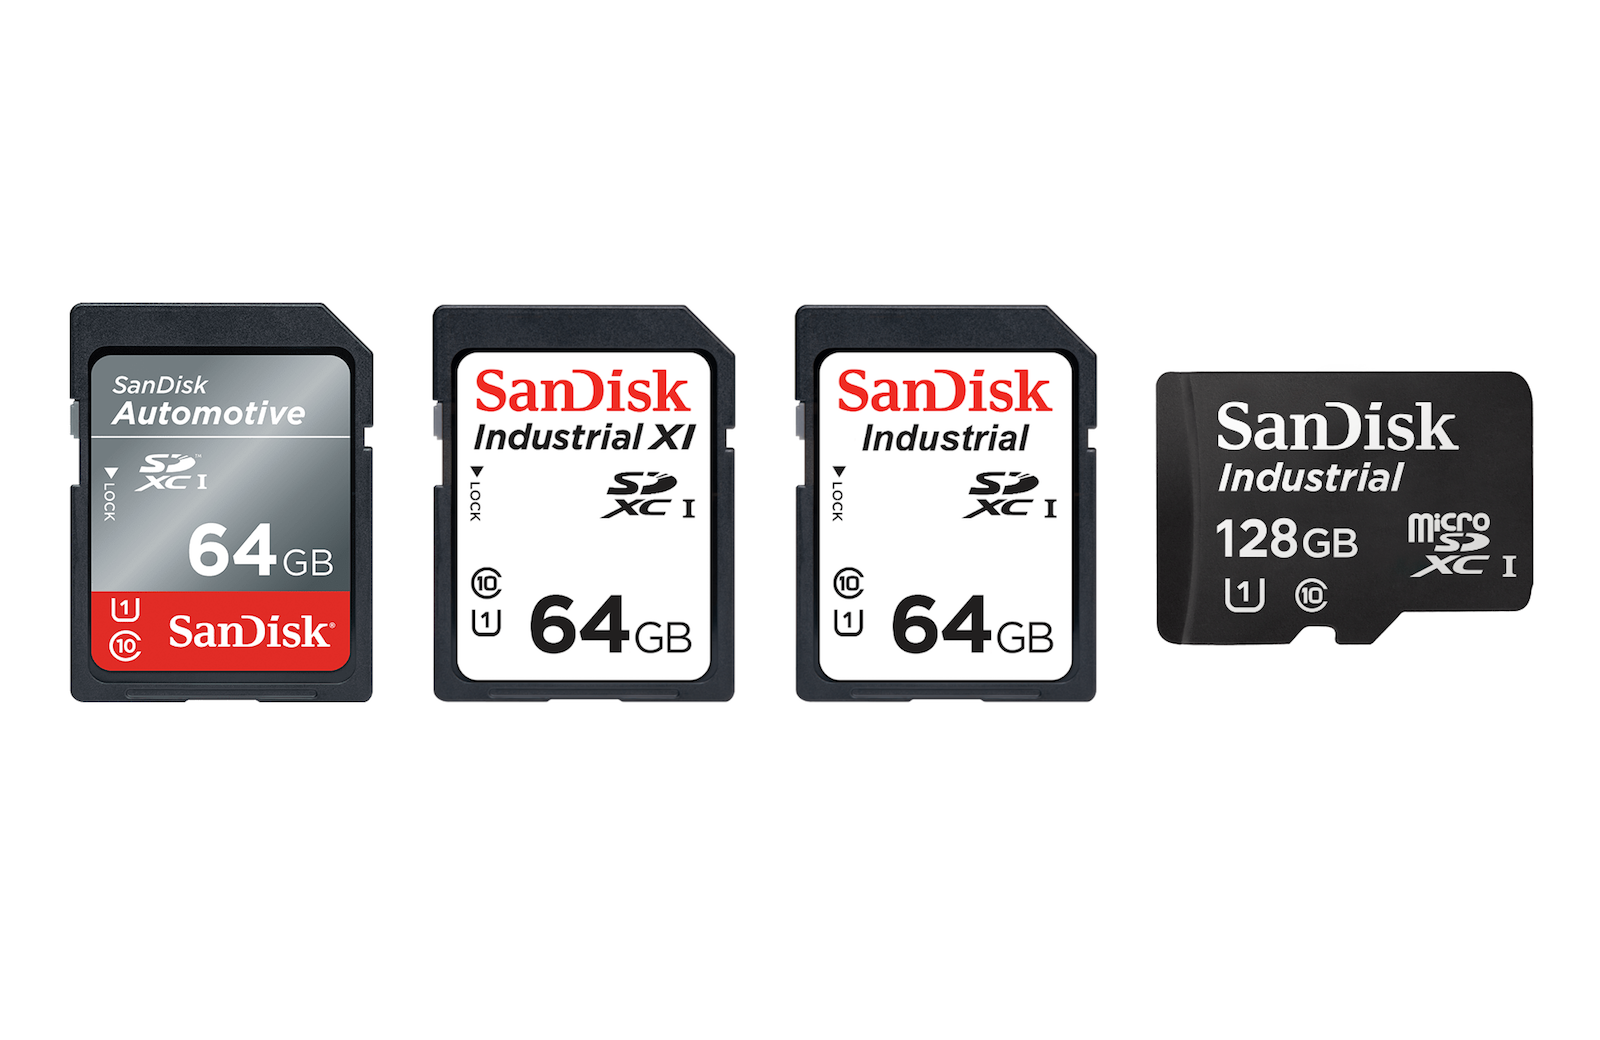 SanDisk’s 'Industrial' SD cards can withstand extreme temperatures | DeviceDaily.com